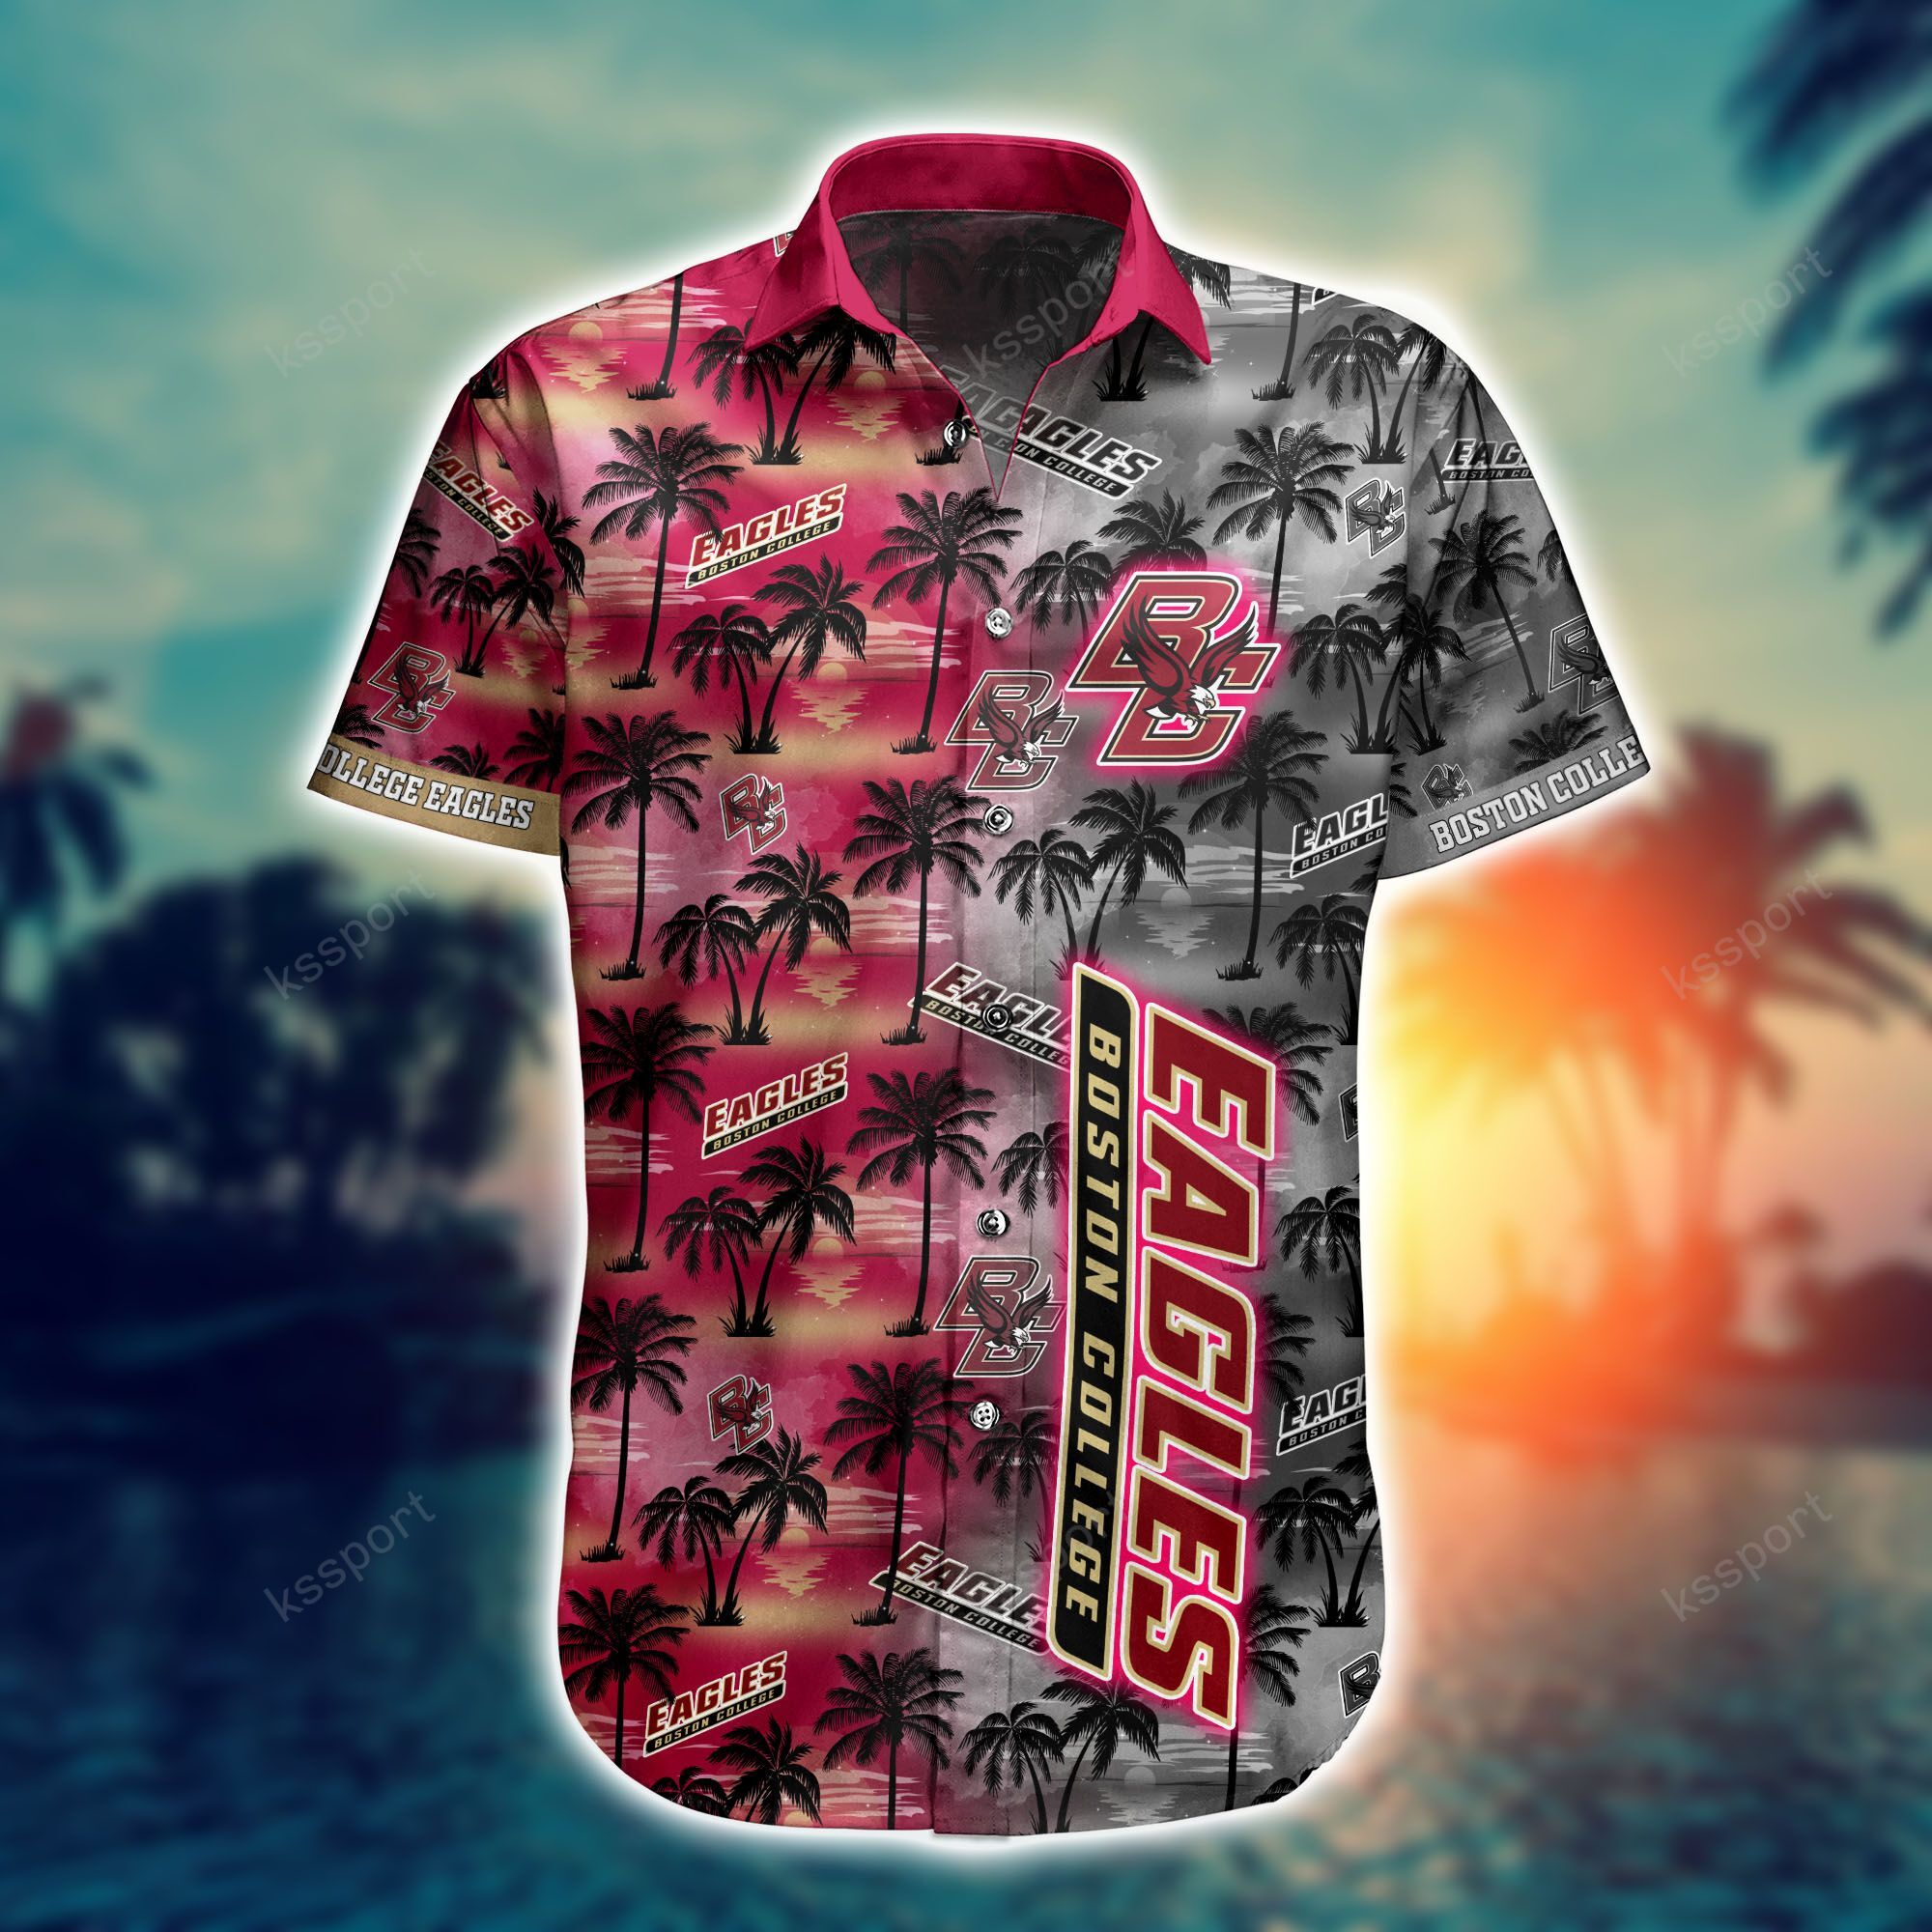 Top cool Hawaiian shirt 2022 - Make sure you get yours today before they run out! 125